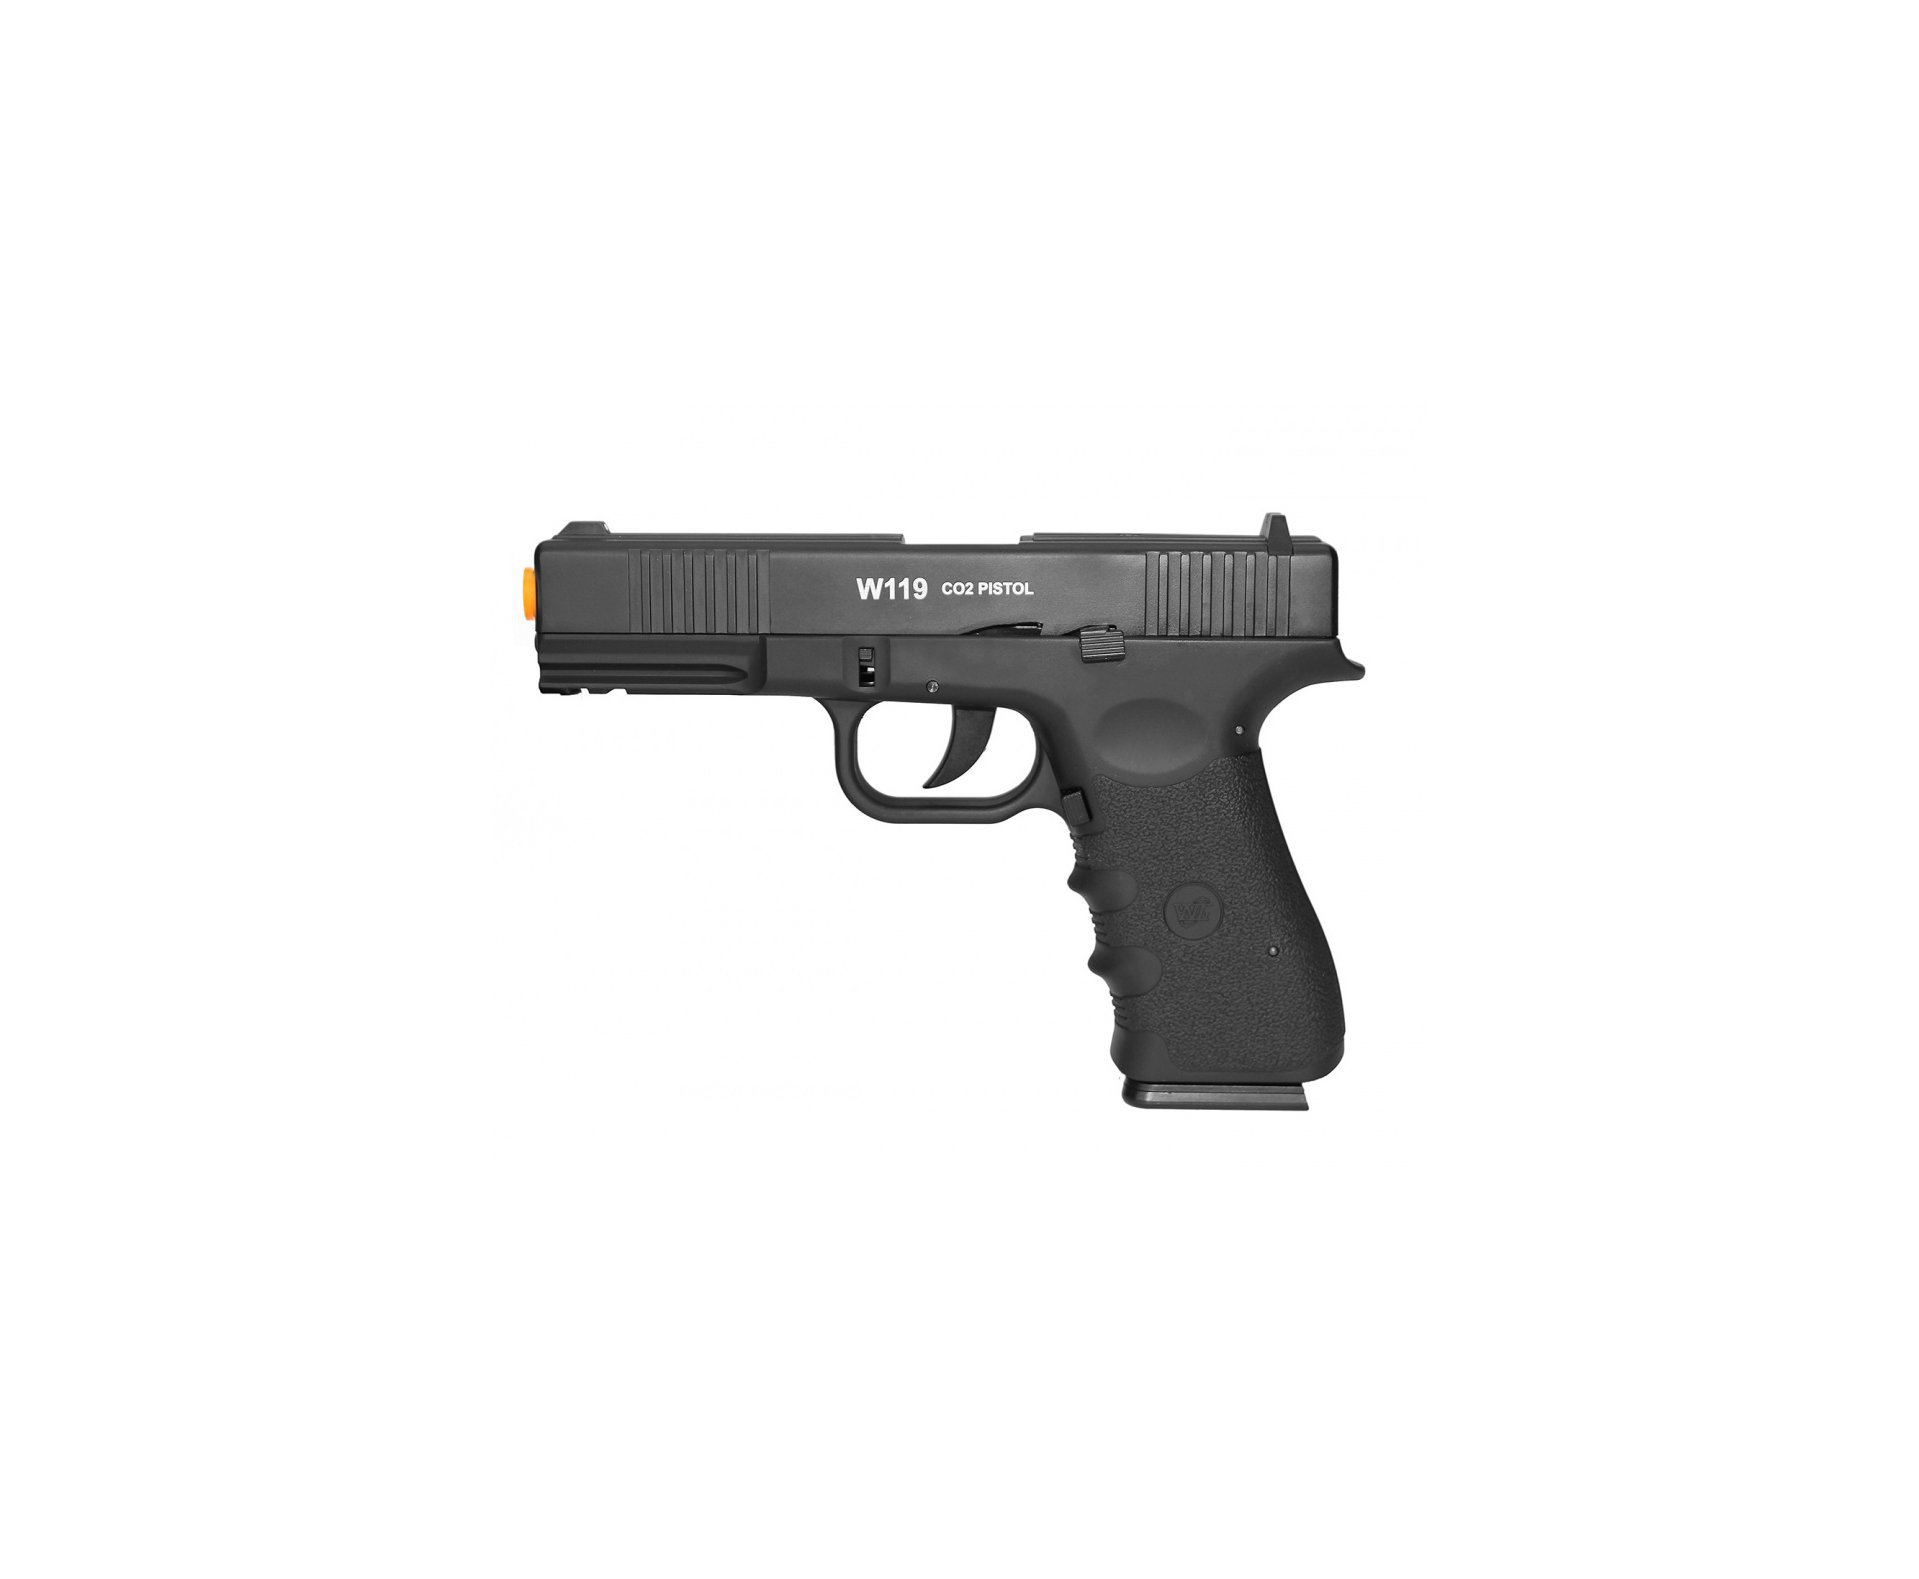 Pistola Airsoft Gas Co2 Wg Glock W119 Slide Metal Blowback 6.0 + 4000bbs + Case + Cilindro Co2